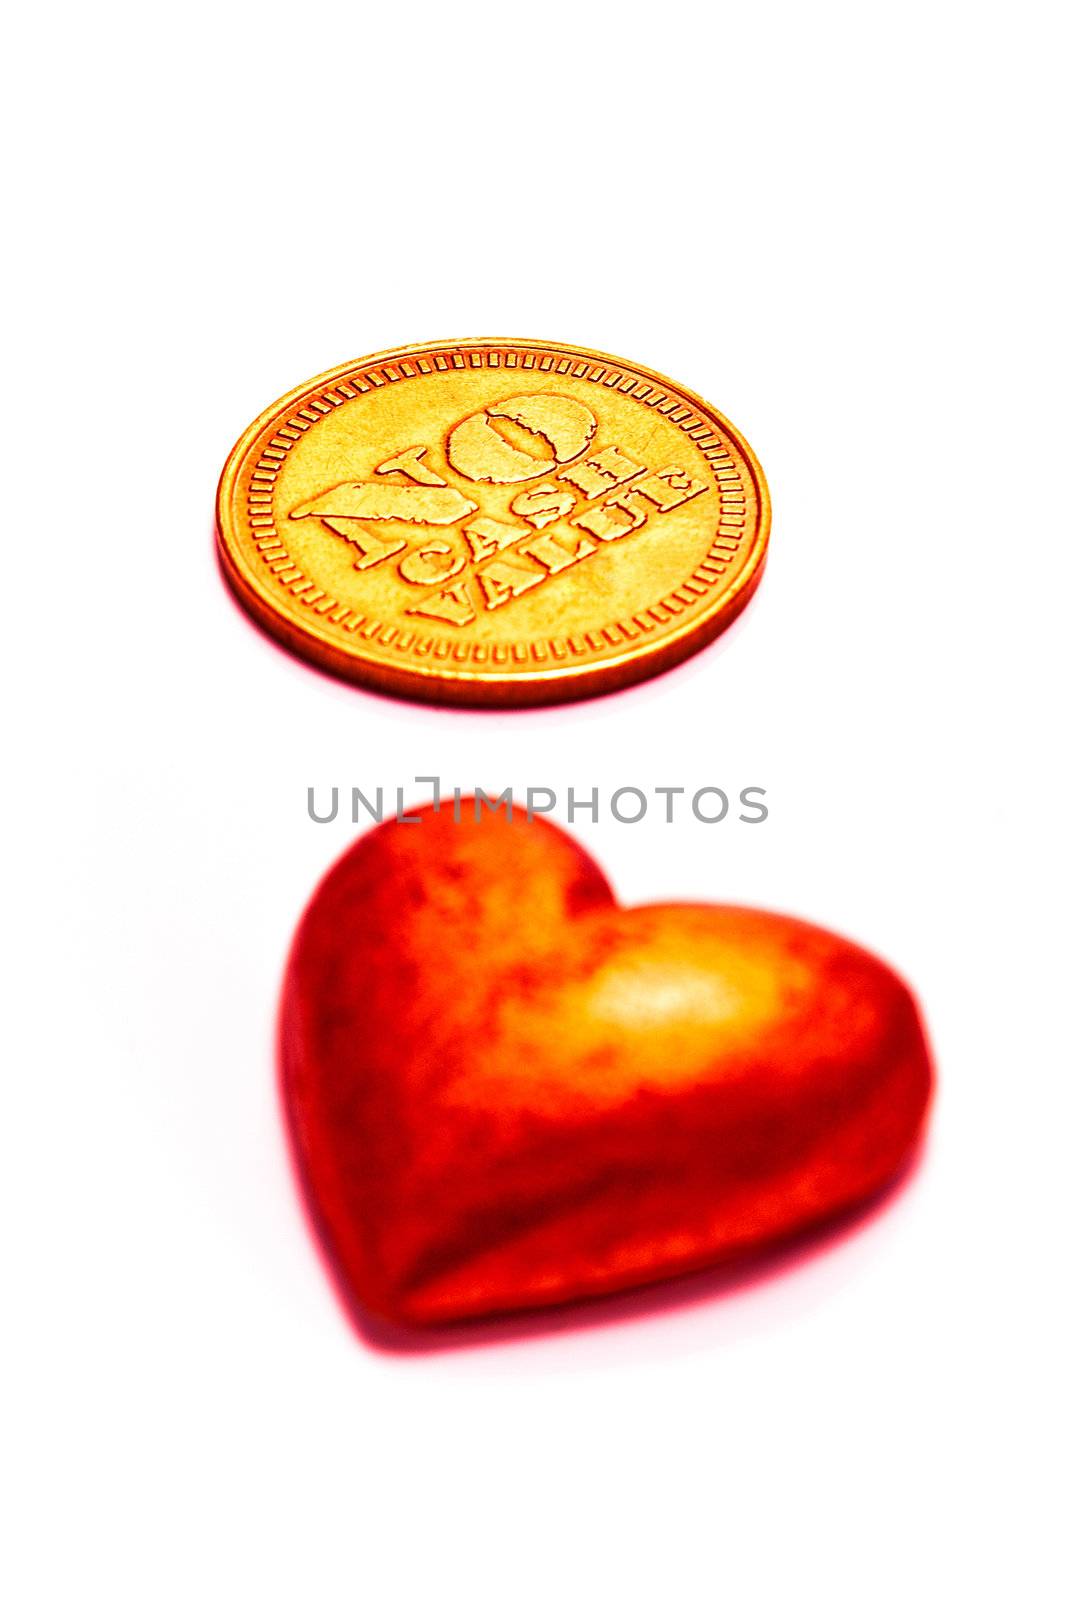 Coin and Heart isolated on white